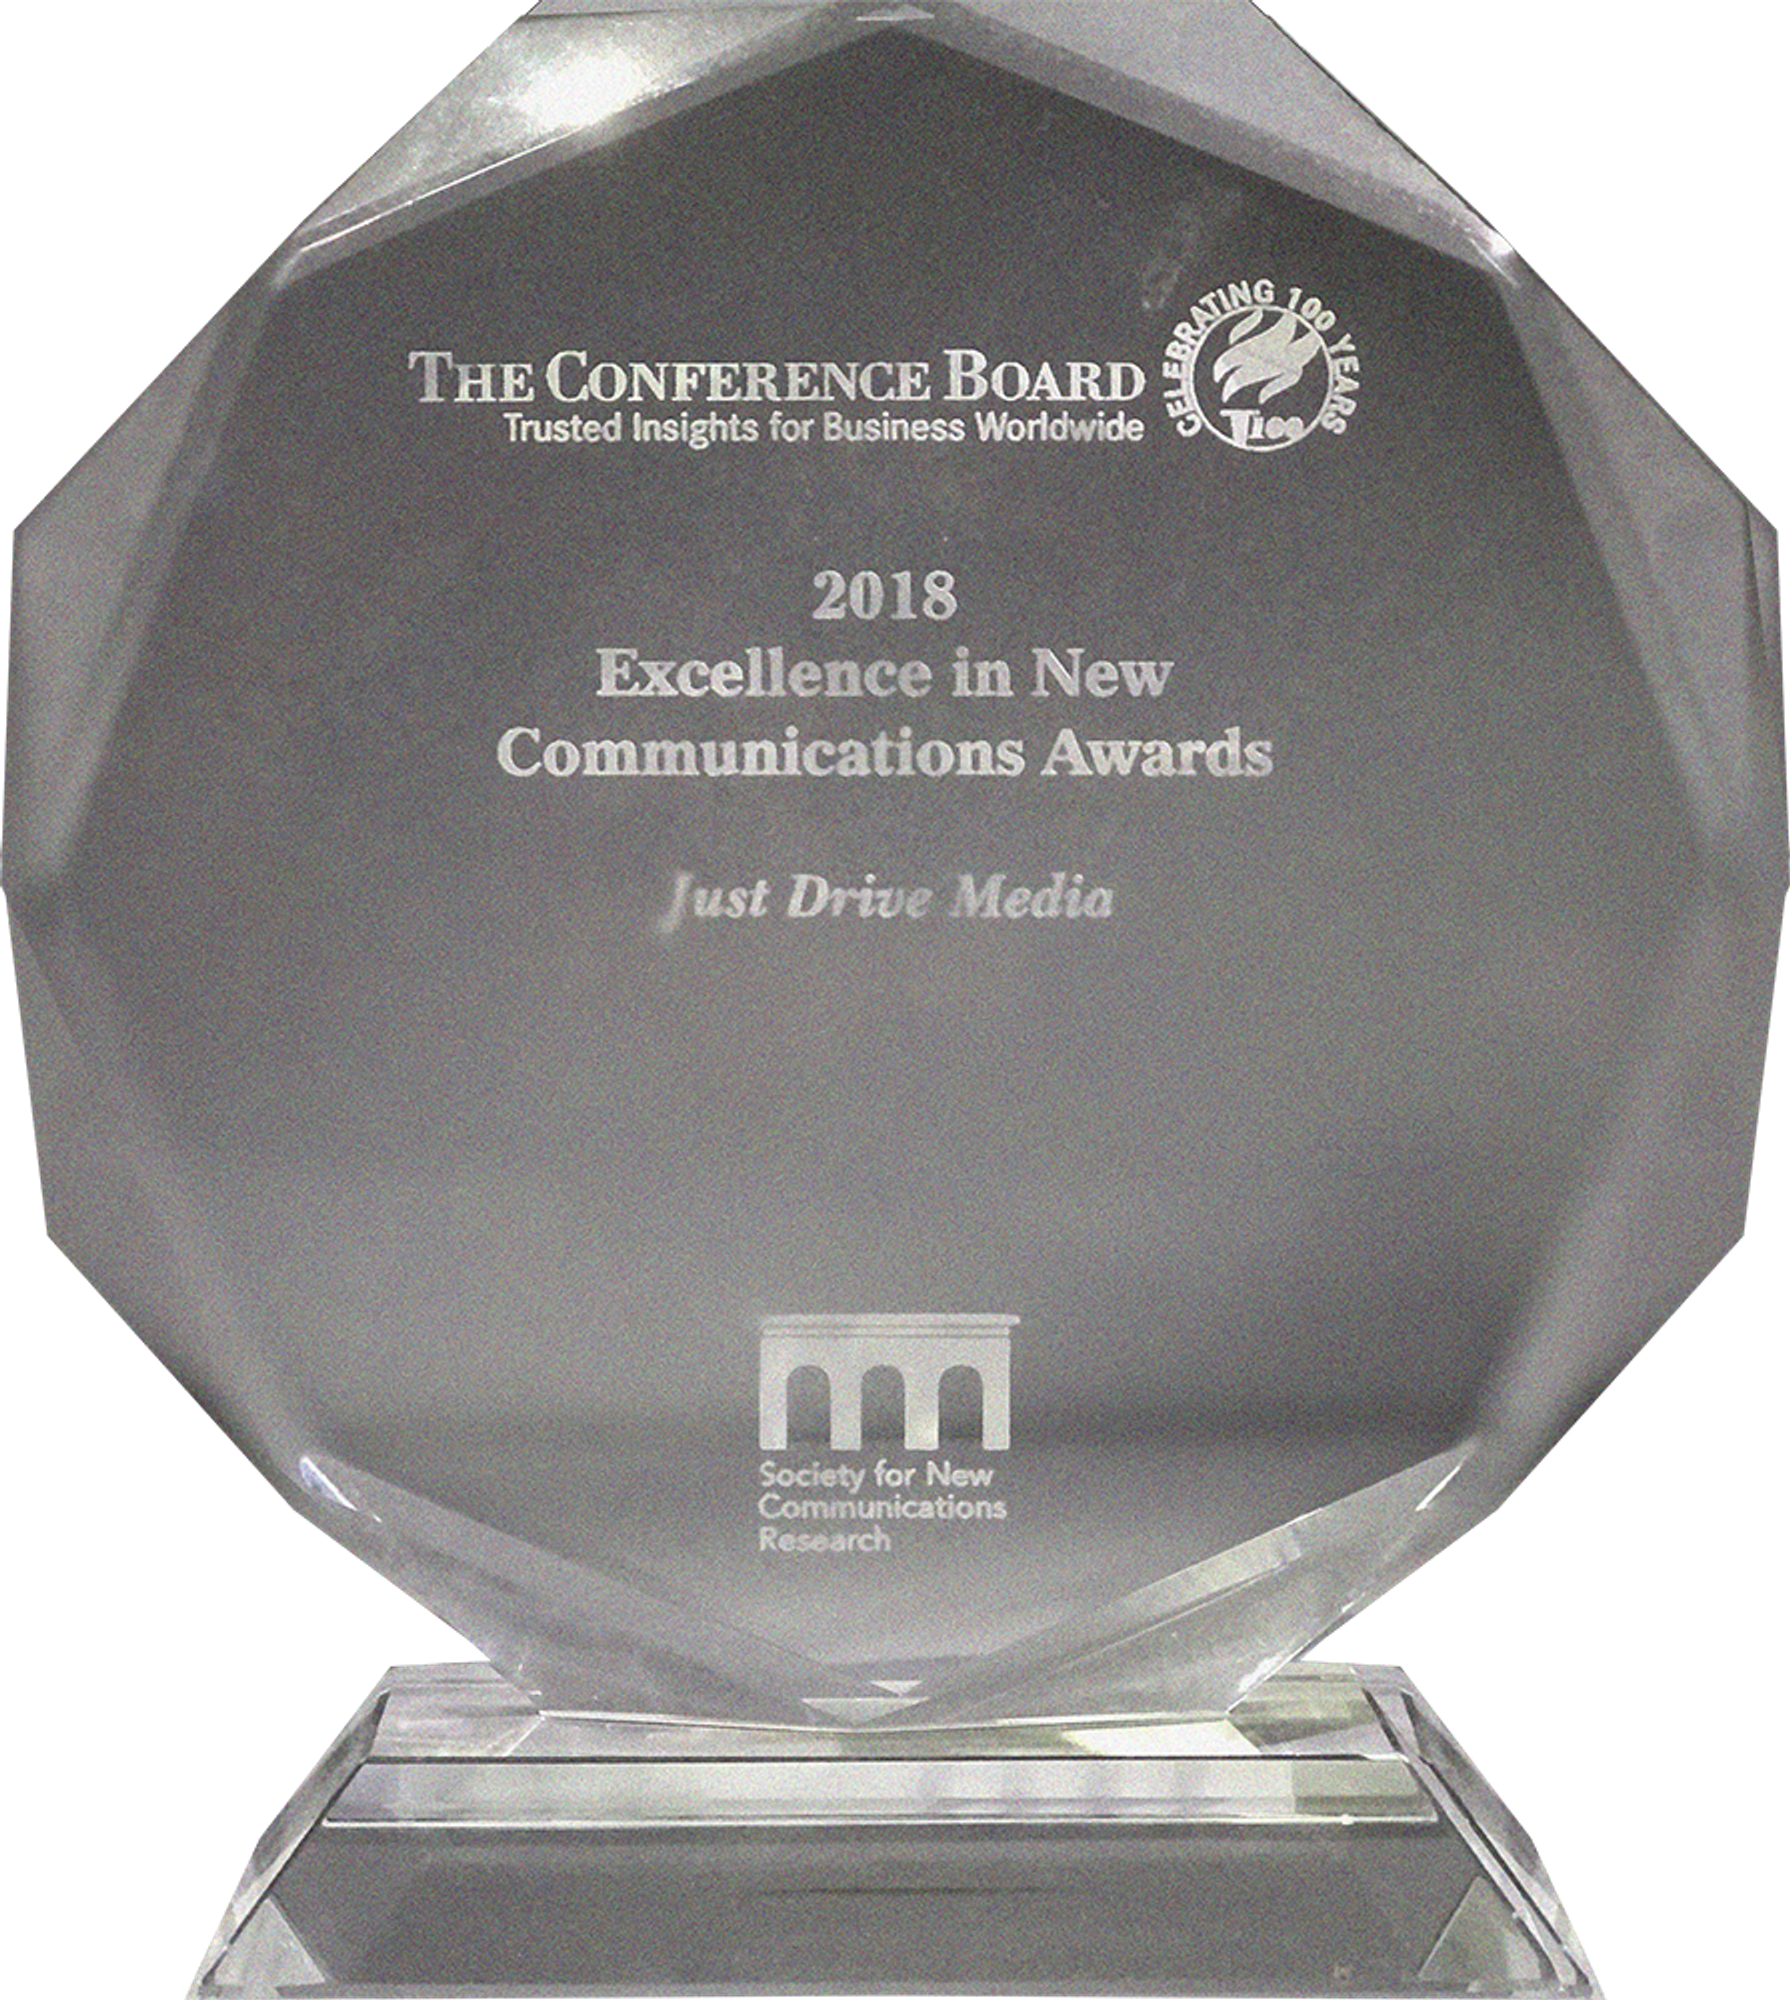 A glass award for "Excellence in New Communications" from 2018 by The Conference Board for Just Drive Media.